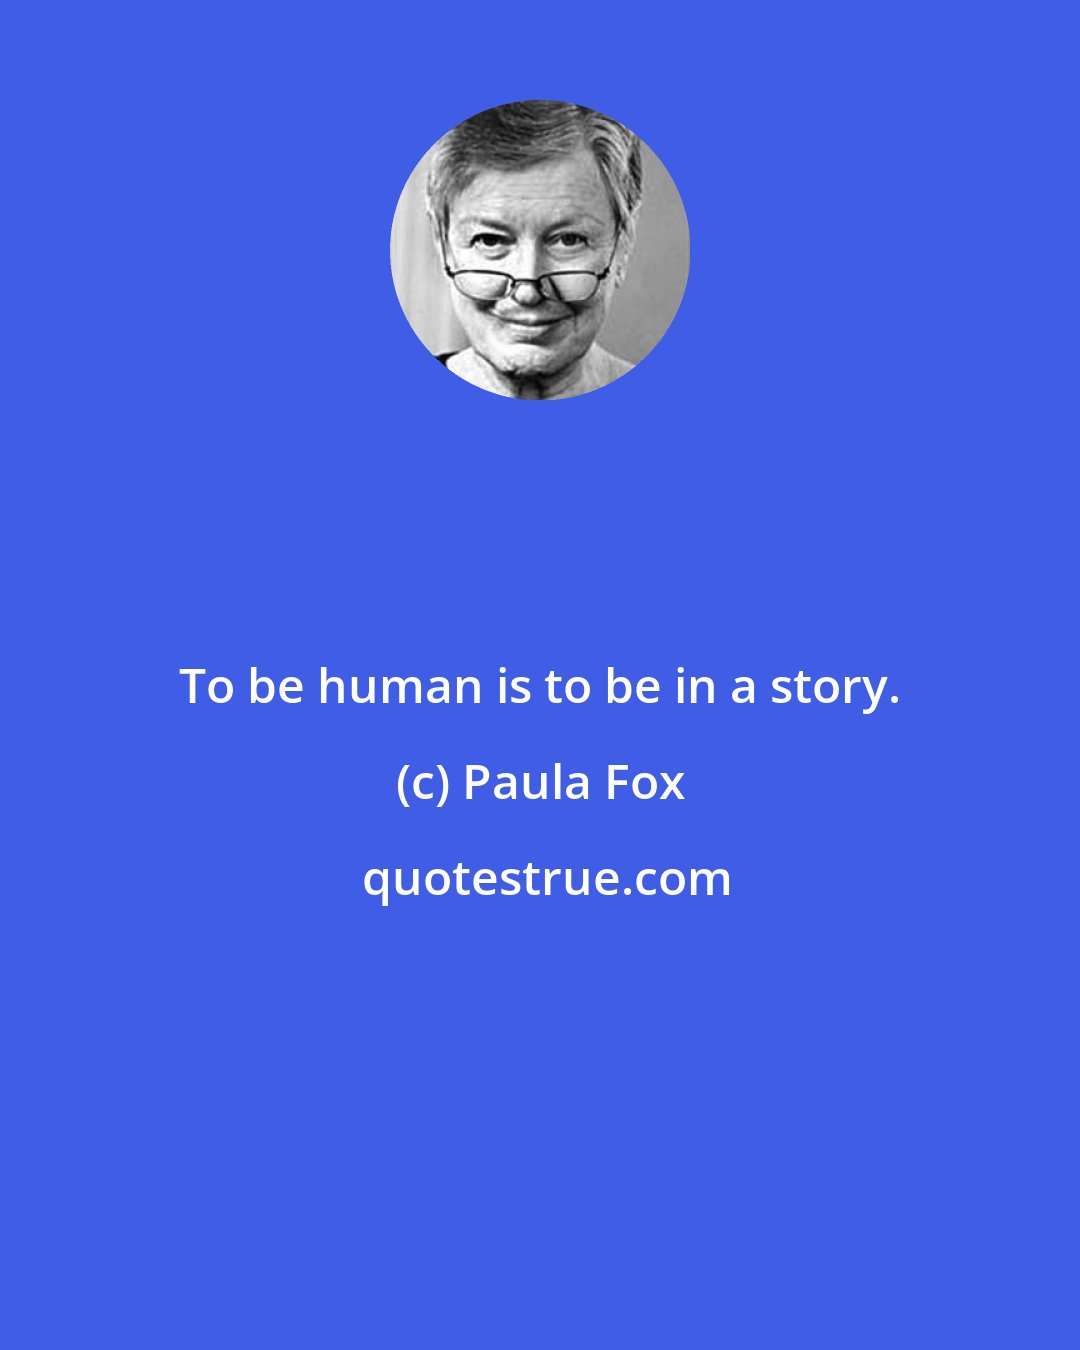 Paula Fox: To be human is to be in a story.